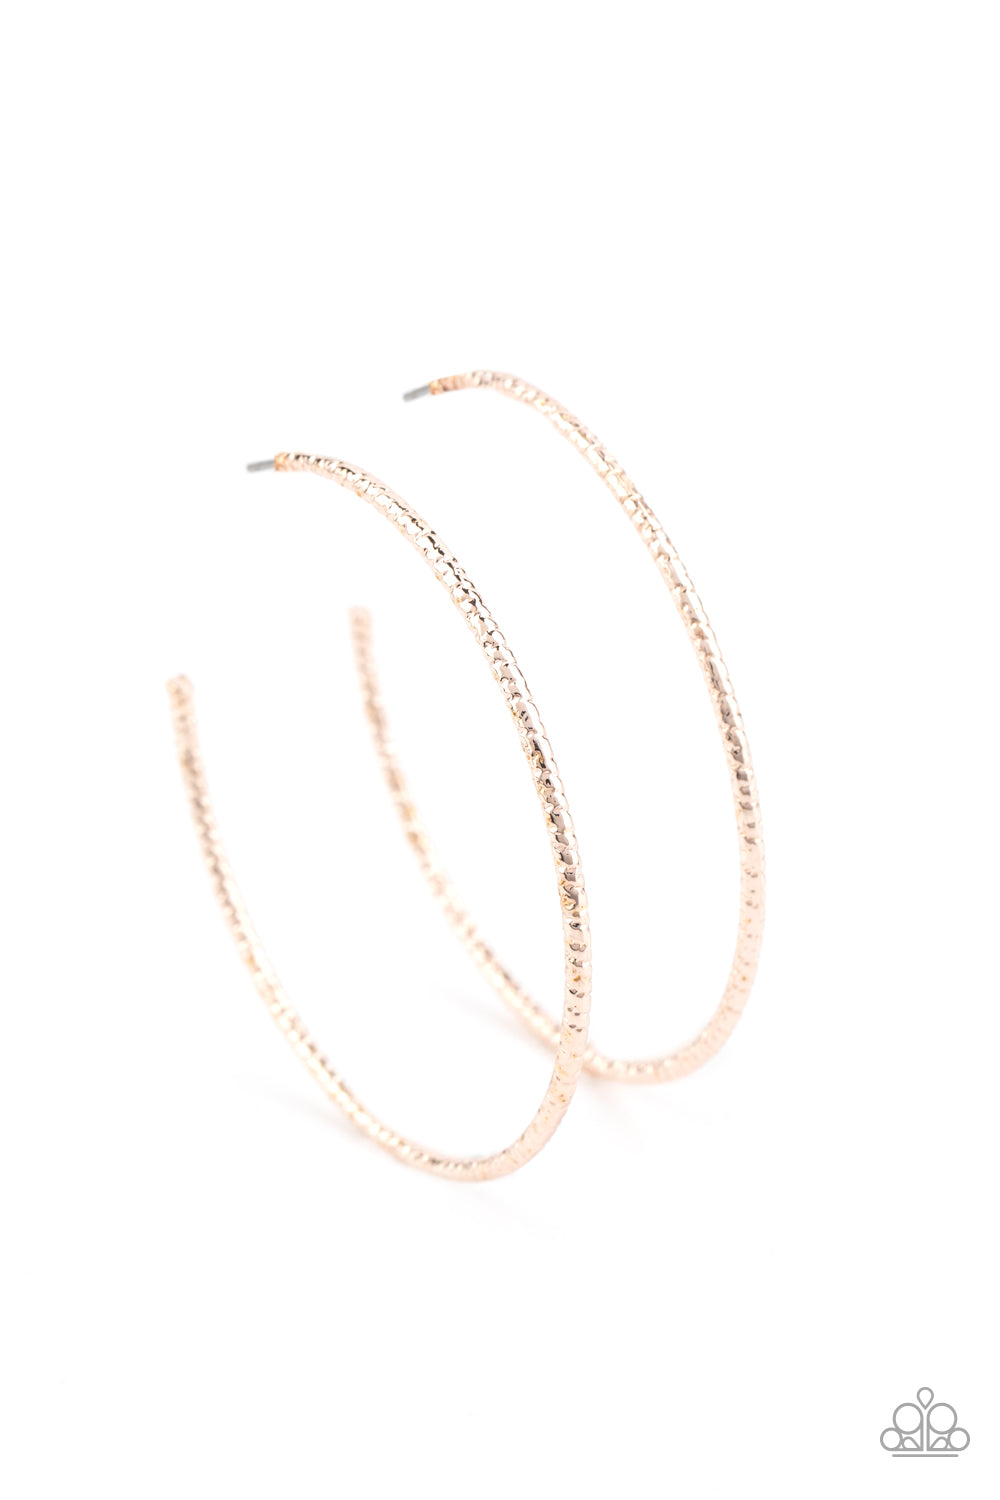 inclined-to-entwine-rose-gold-p5ho-gdrs-161xx